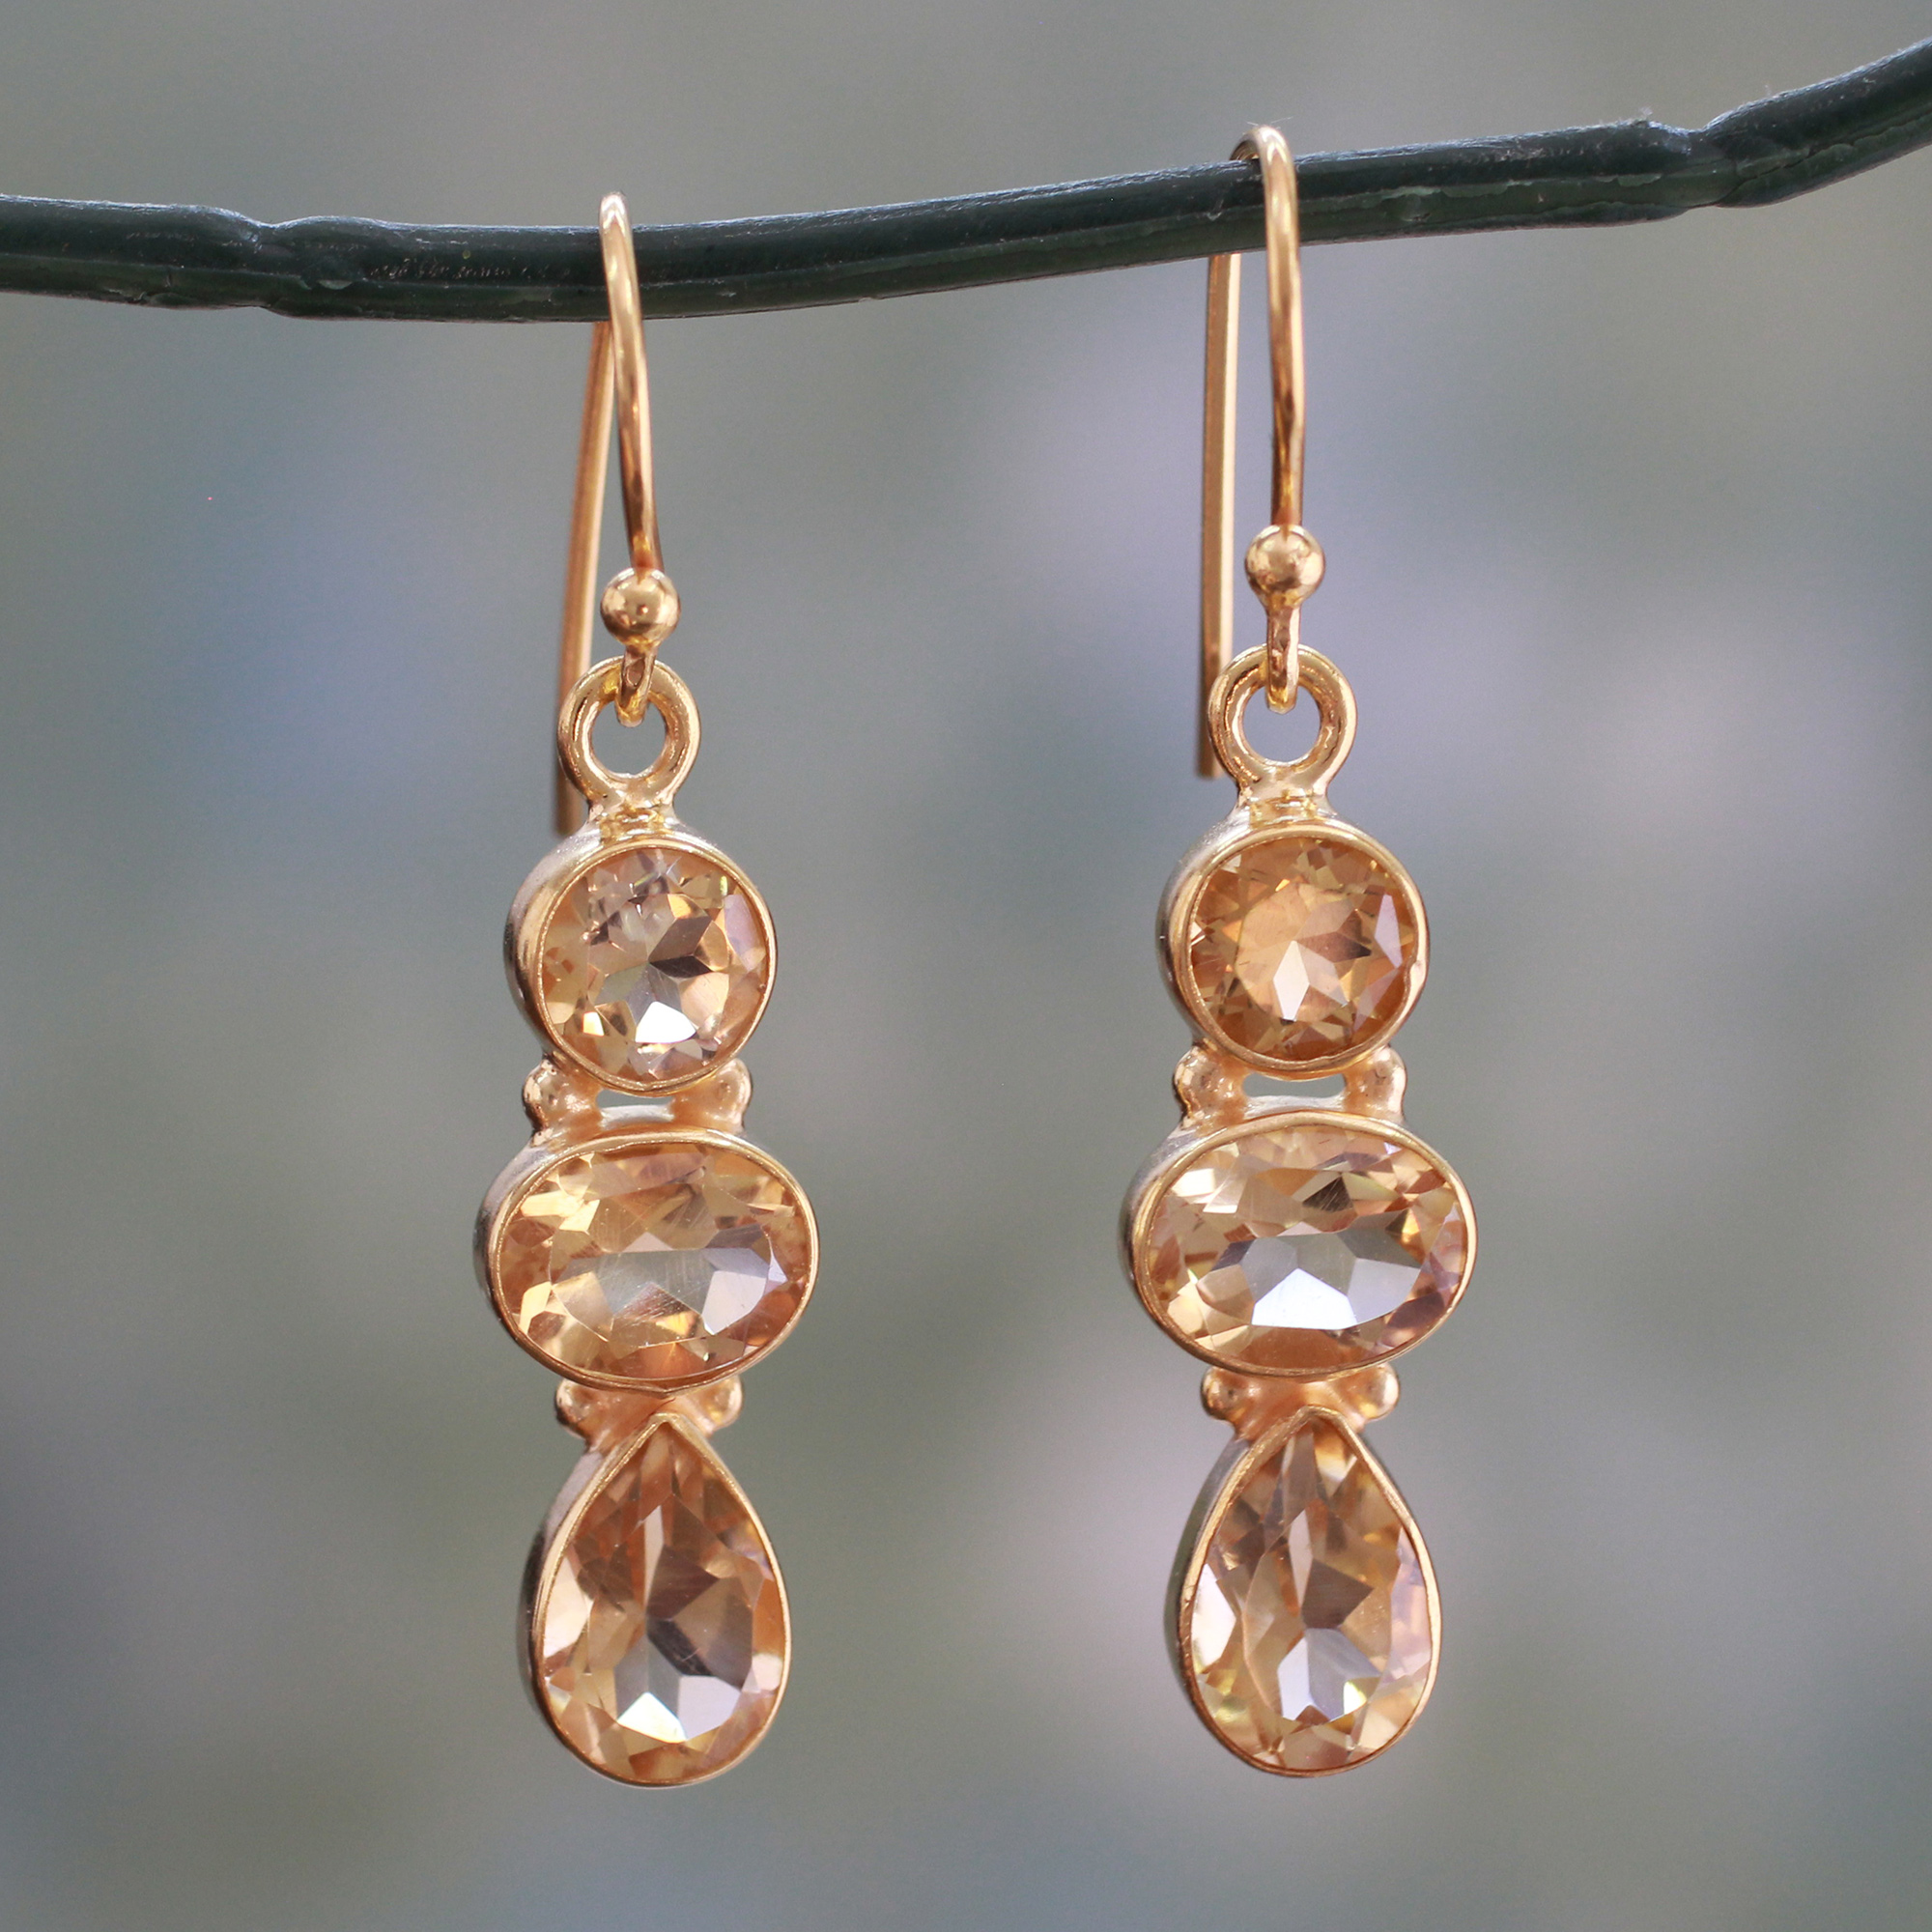 Gemstone to Complement Skin Tone 22k Gold Vermeil Dangle Earrings with Citrine Gems, 'Golden Dazzle'